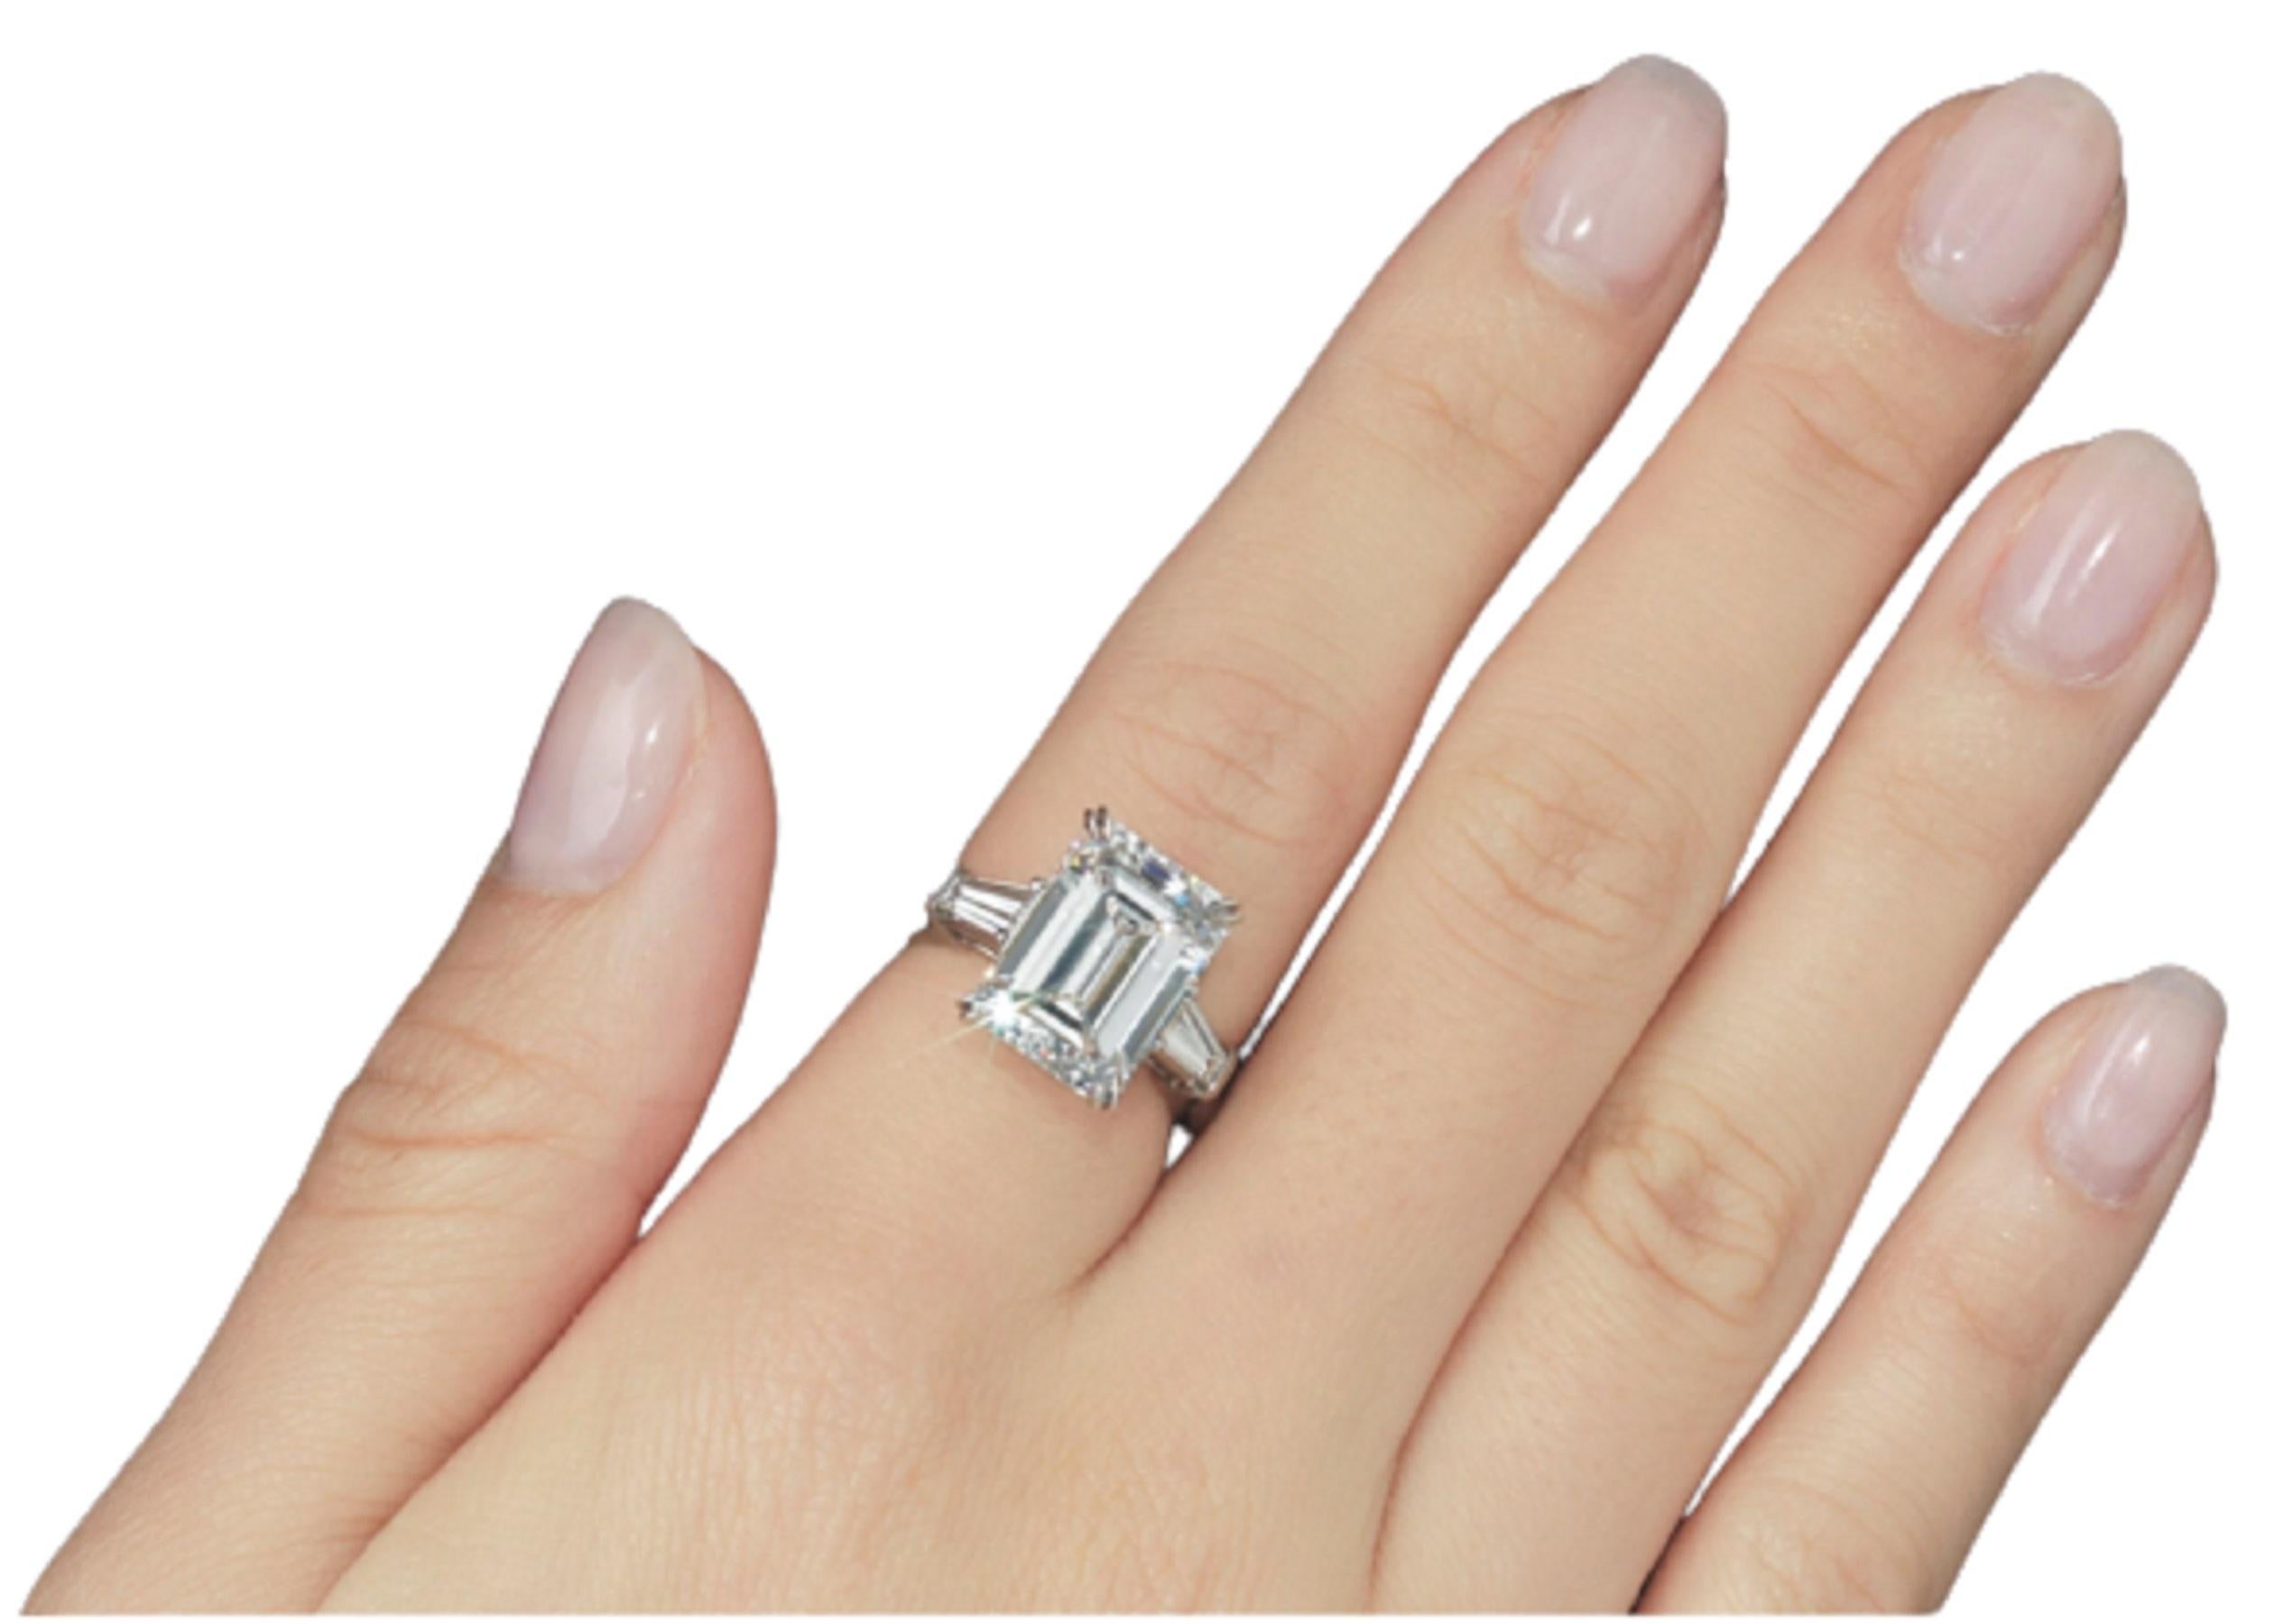 An exquisite emerald cut diamond ring composed by a main stone that weights 2.50 carats has an excellent proportion polish and symmetry. The side stones are tapered baguettes also very pure and white

The ring is set in 18 carats white gold

The